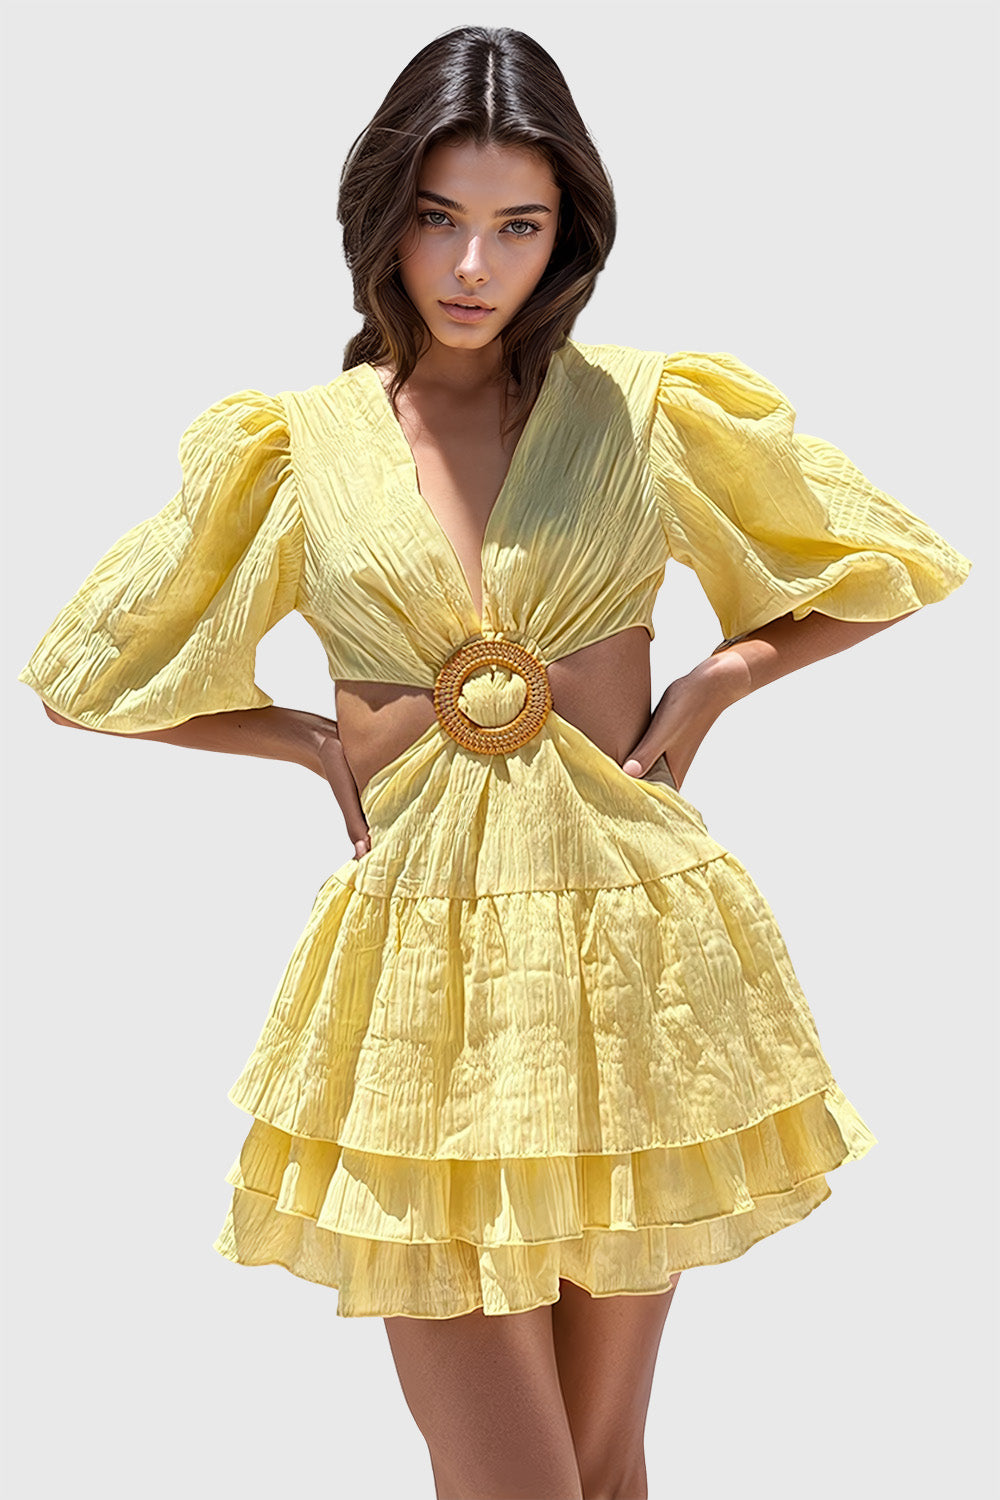 Ruffled Short Dress with Sleeves - Yellow